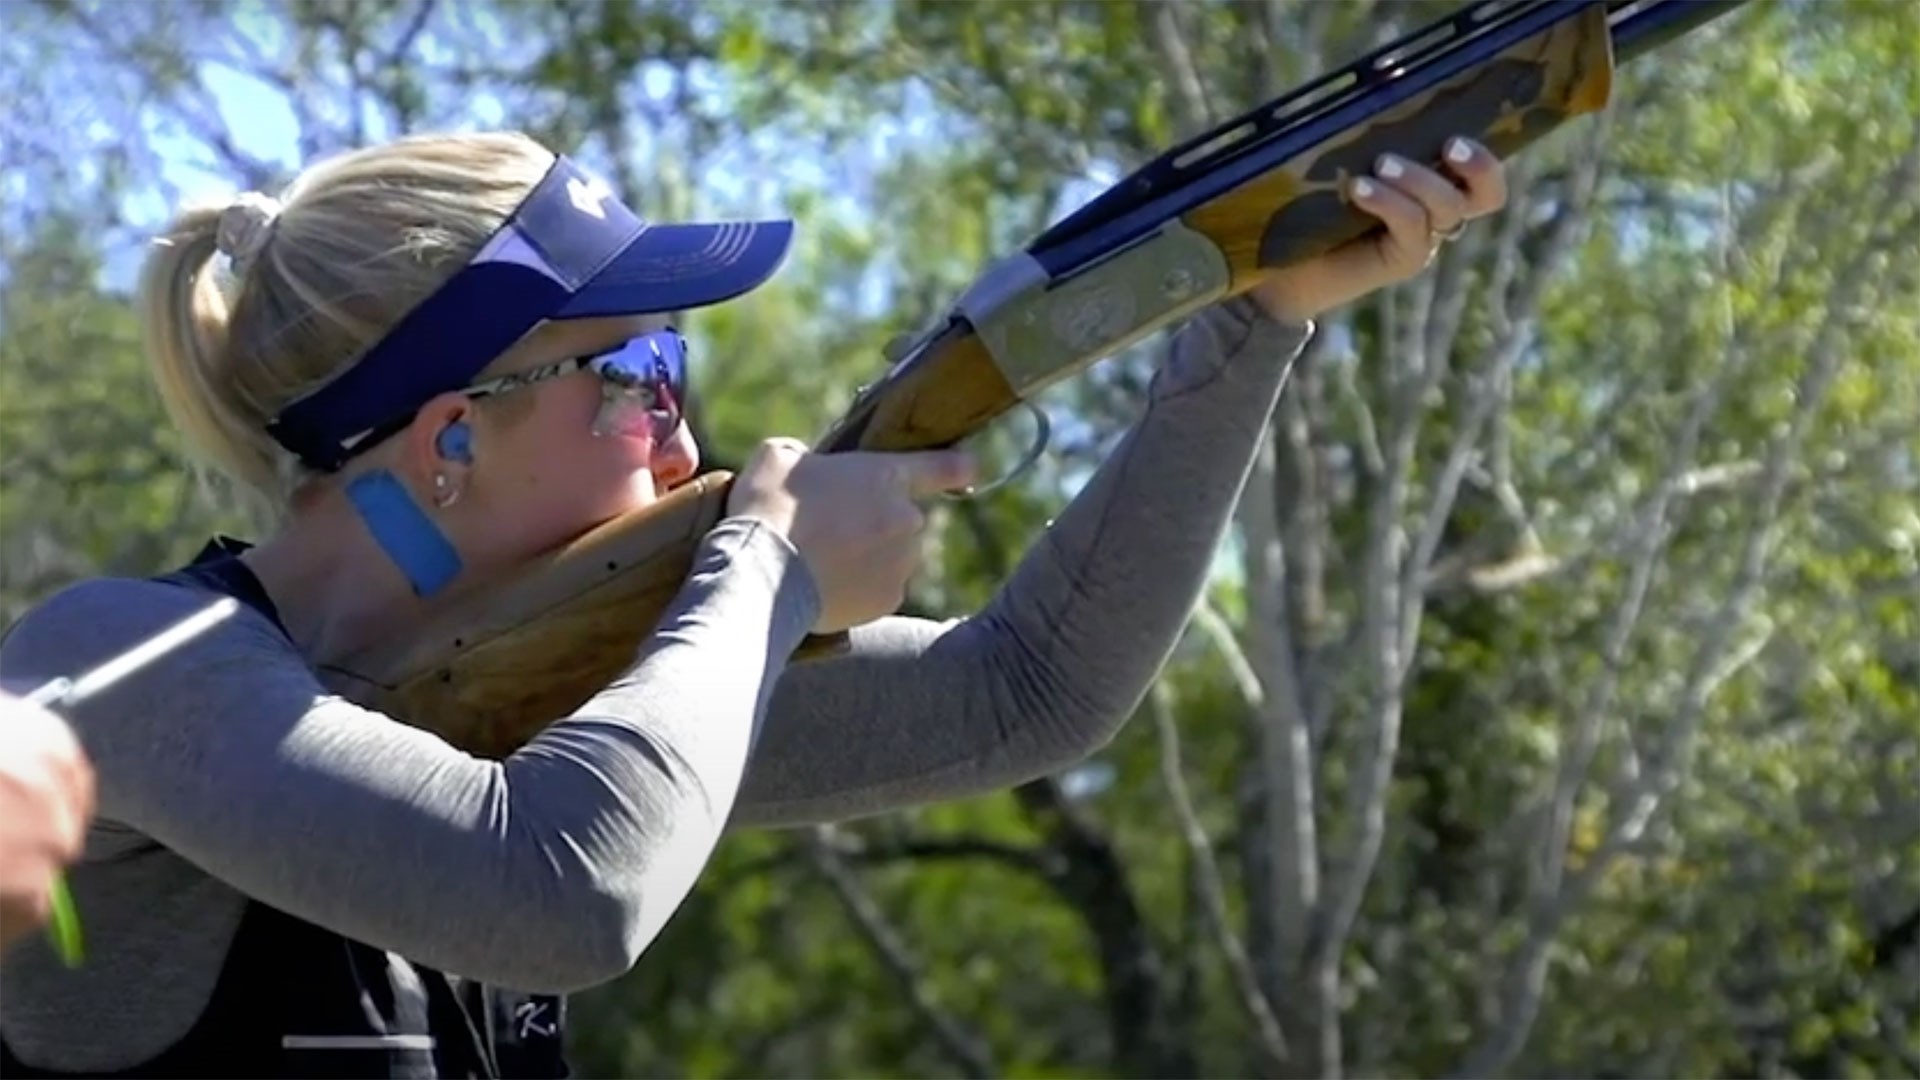 ARTV Preview: Winchester Ladies Cup, S&W M&P9 Shield Plus OR ...